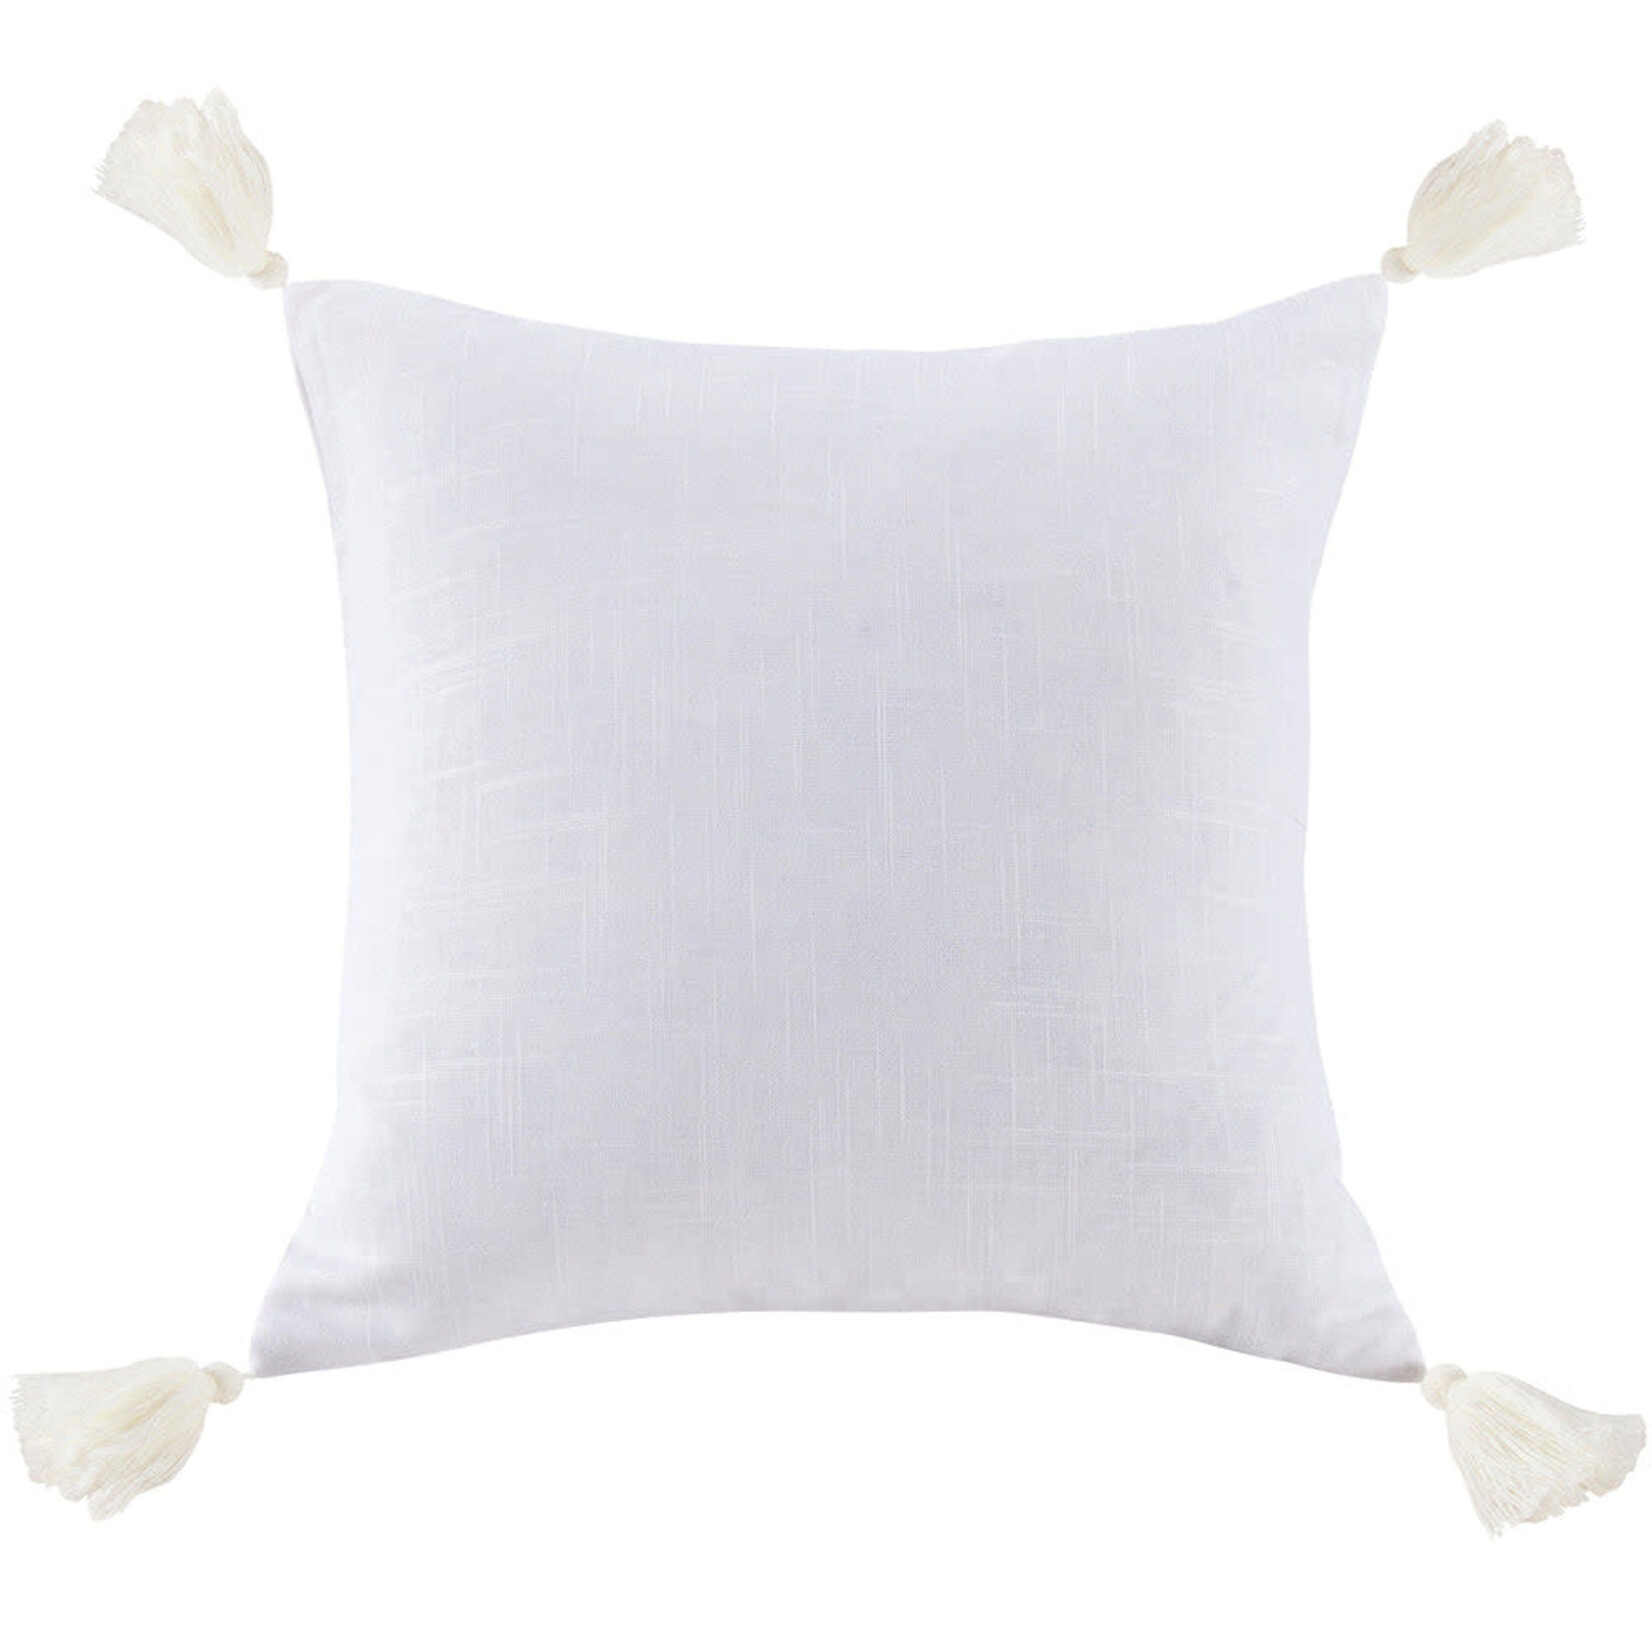 HiEnd Accents Square Washed Linen Tasseled 18"x18" Bed Accent Pillow